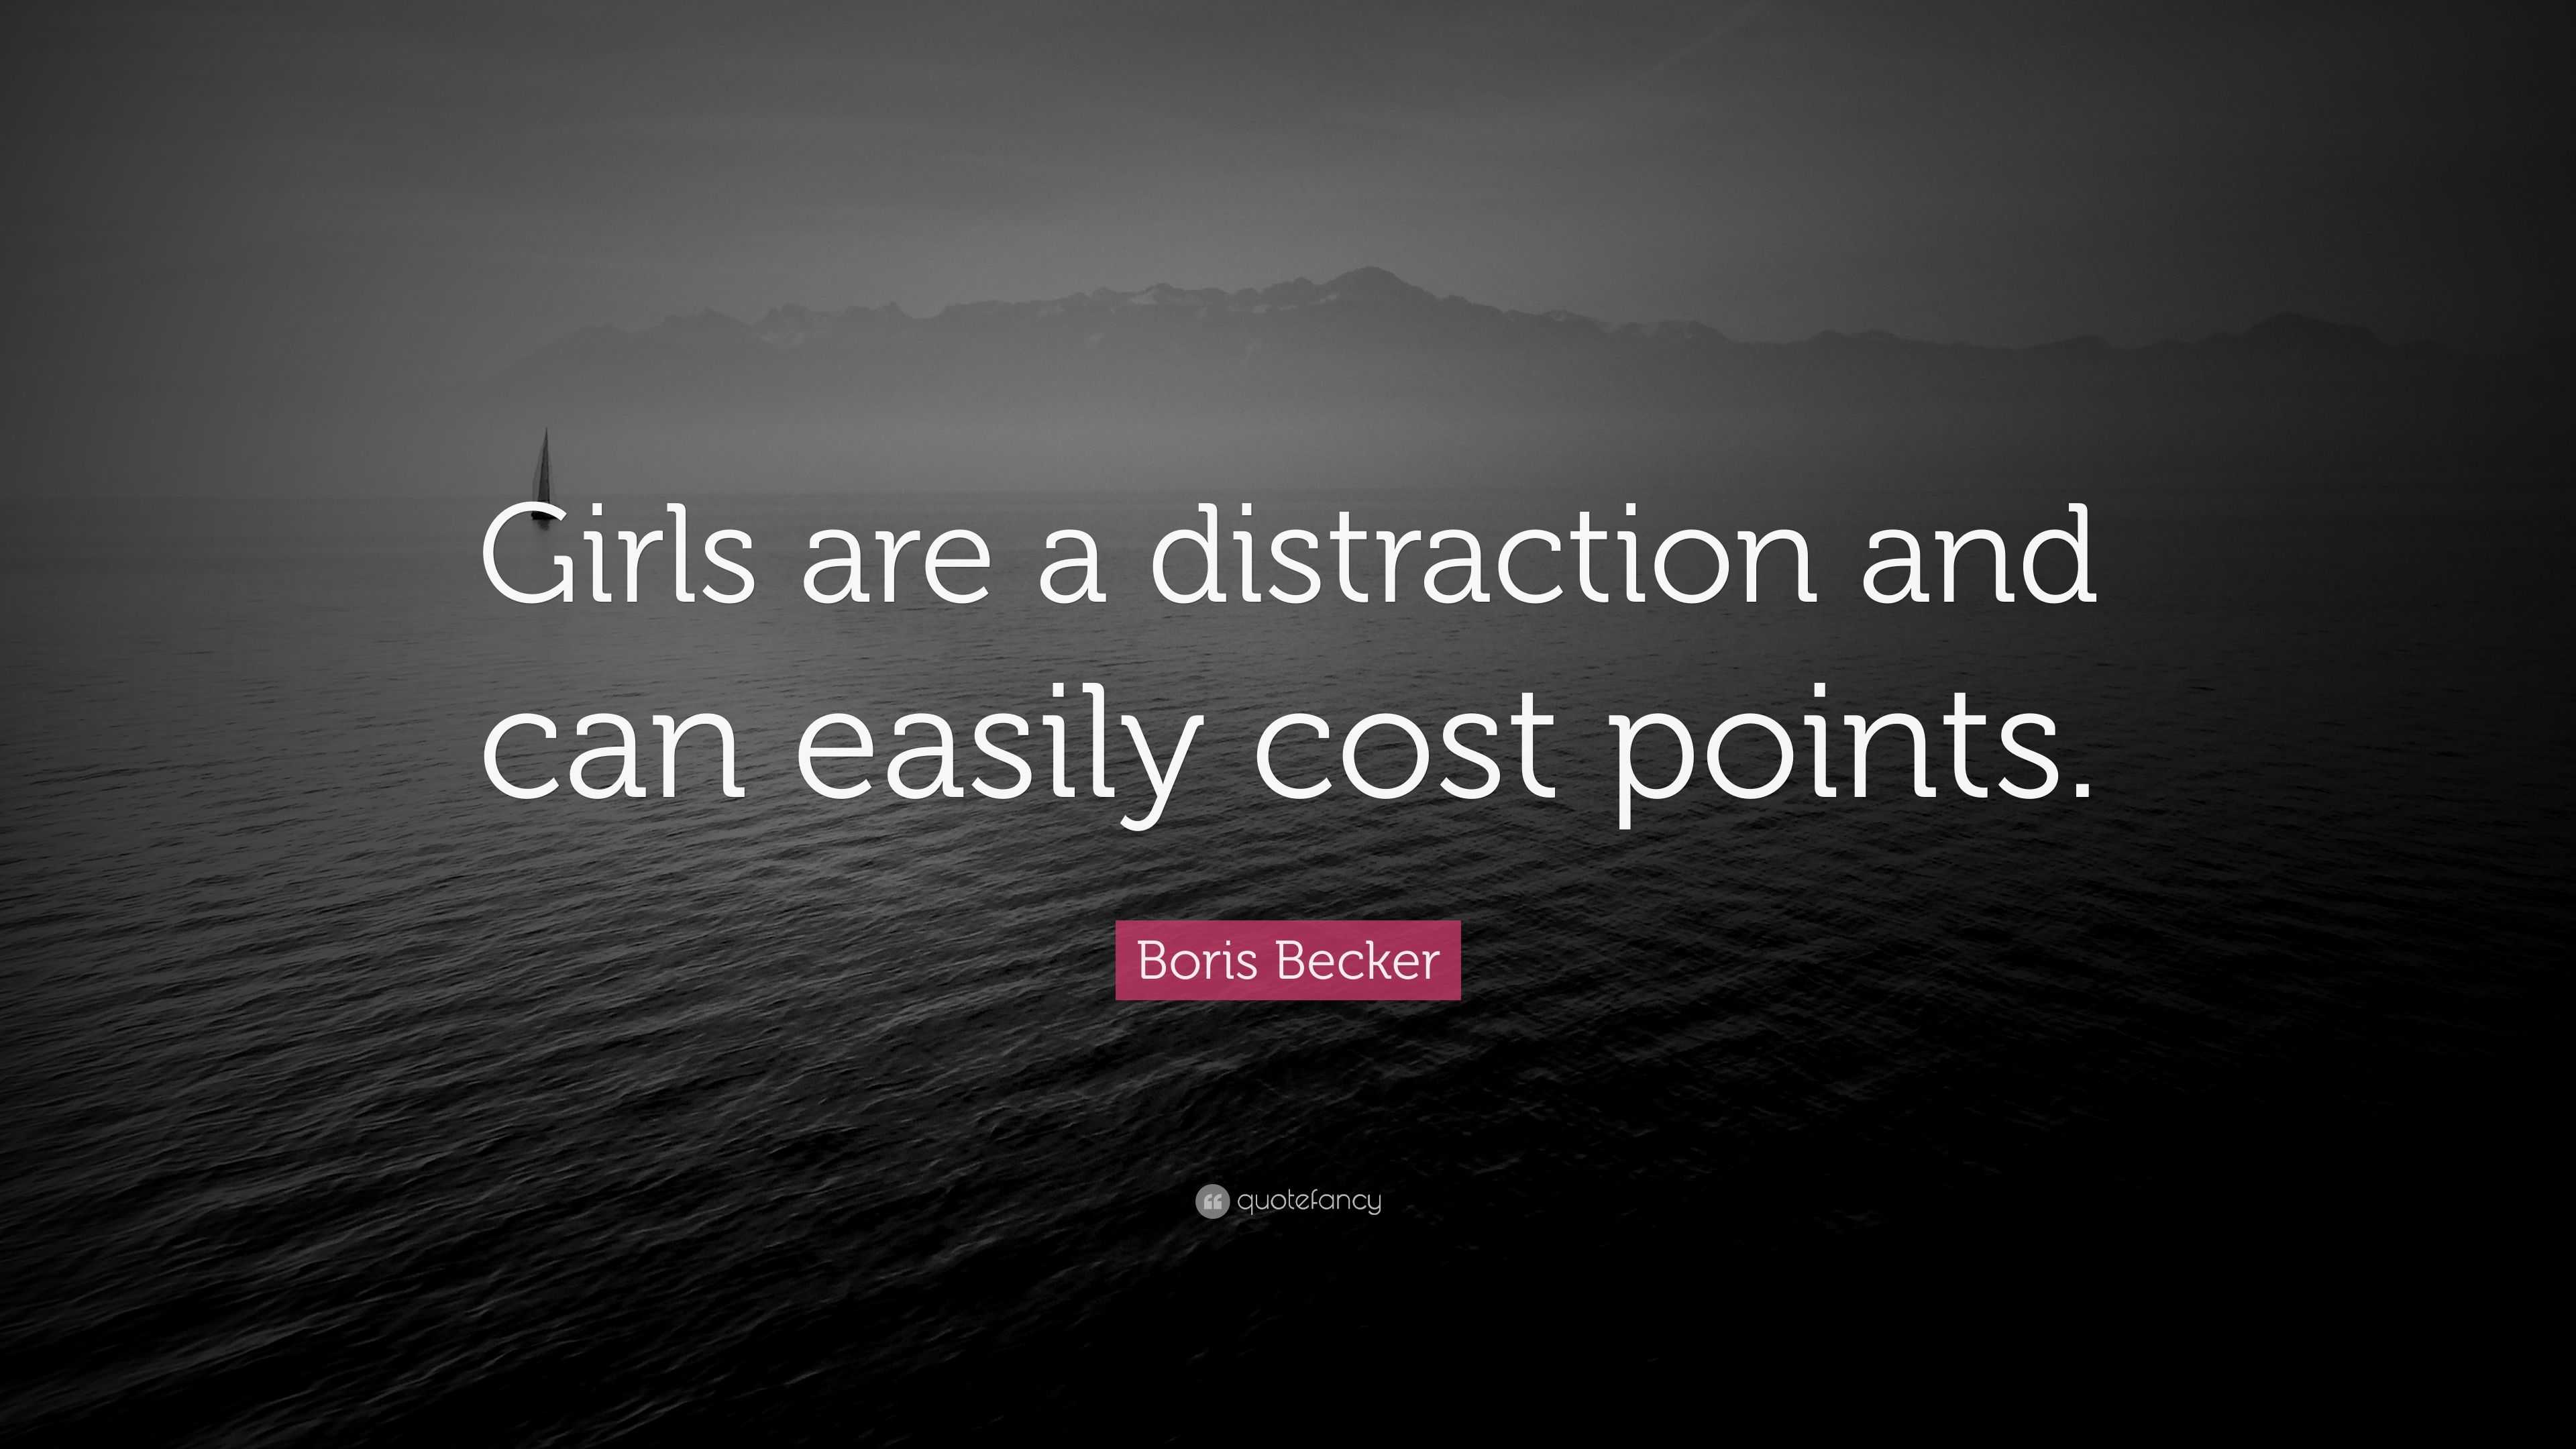 Boris Becker Quote: “Girls are a distraction and can easily cost points.”